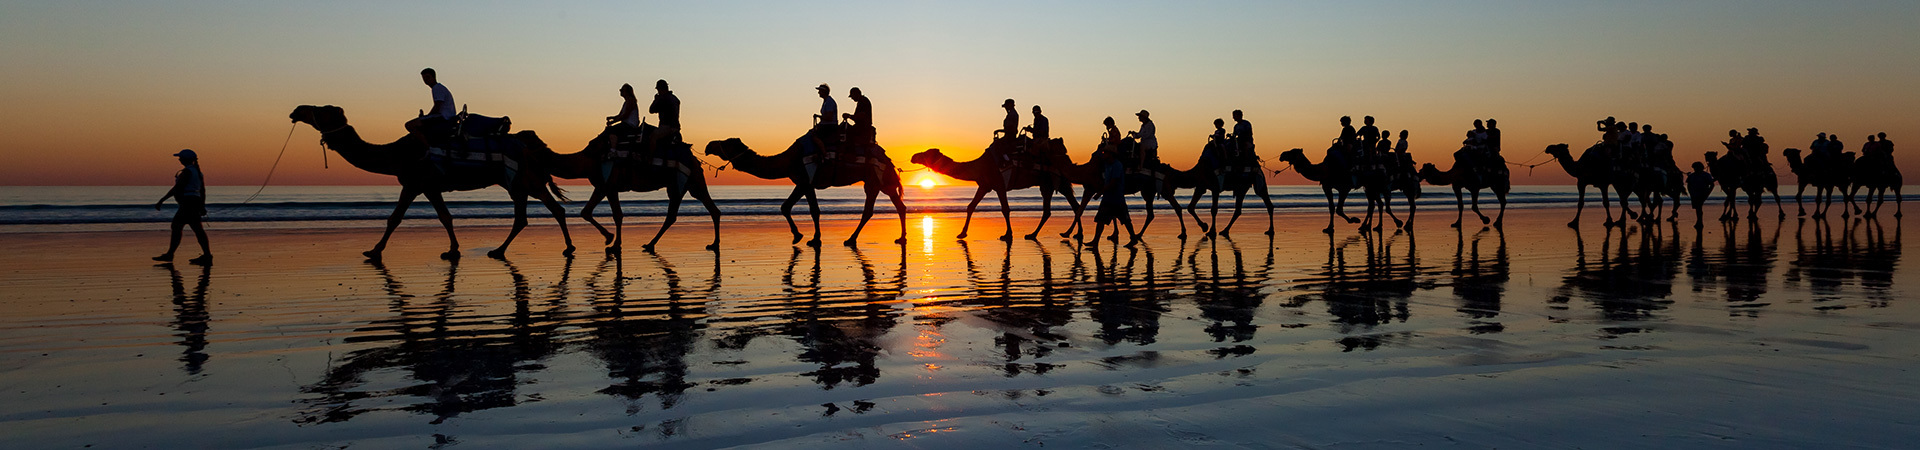 Camels on beach in Australia